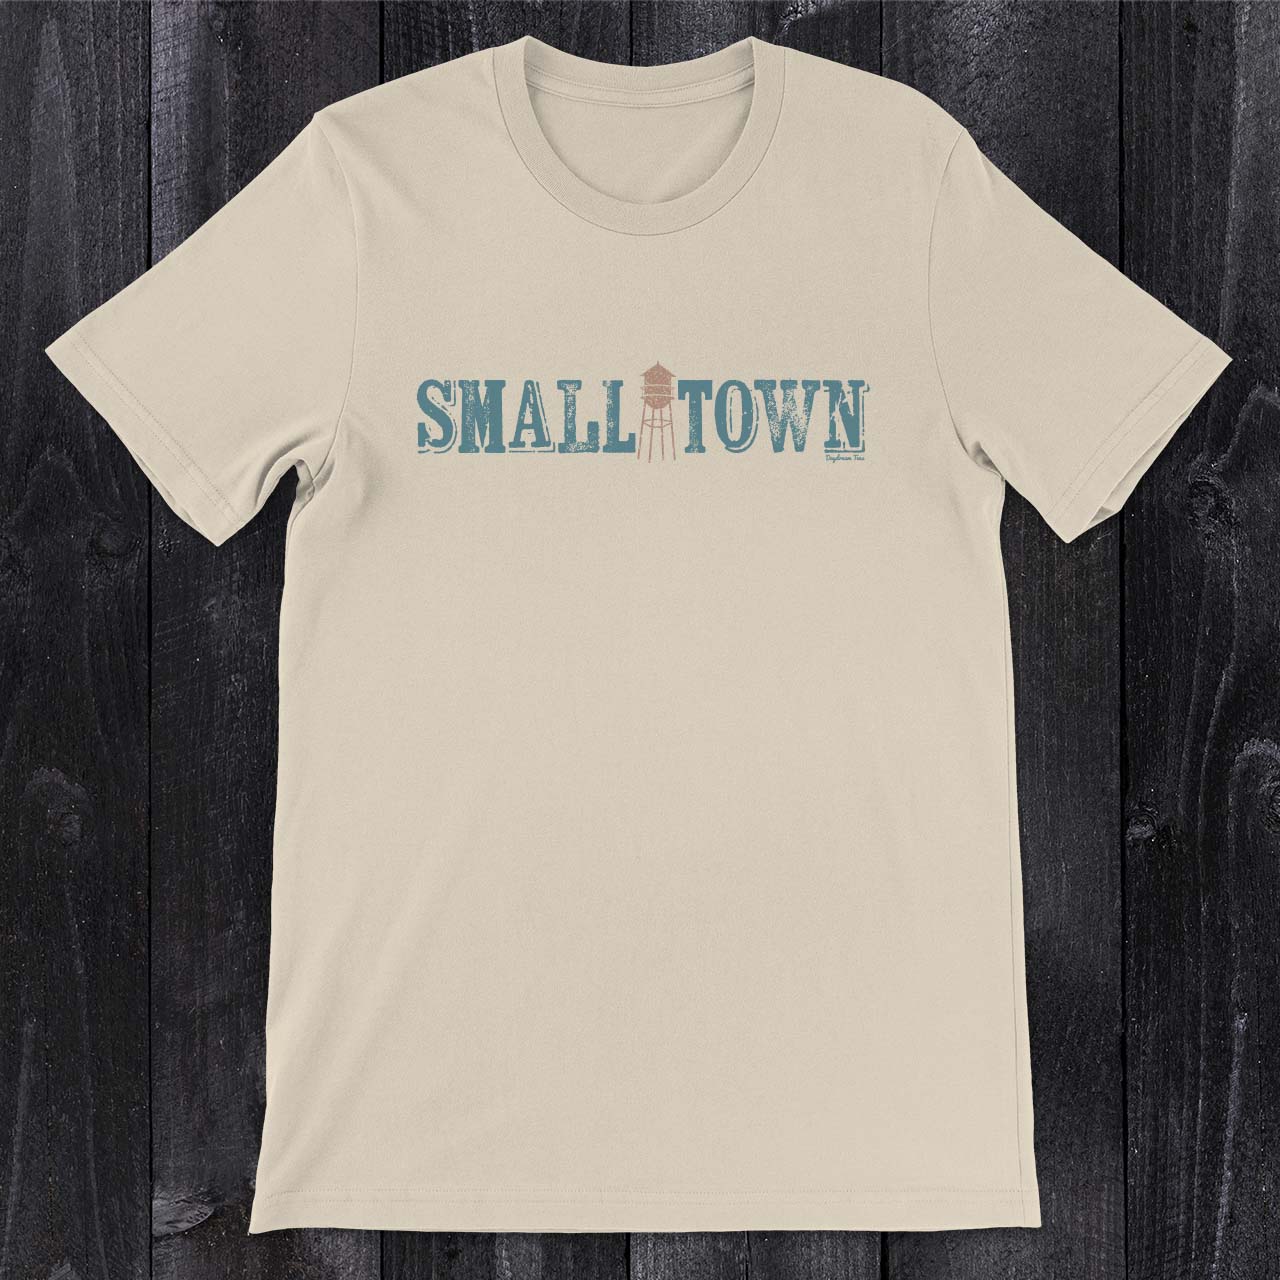 Daydream Tees Small Town